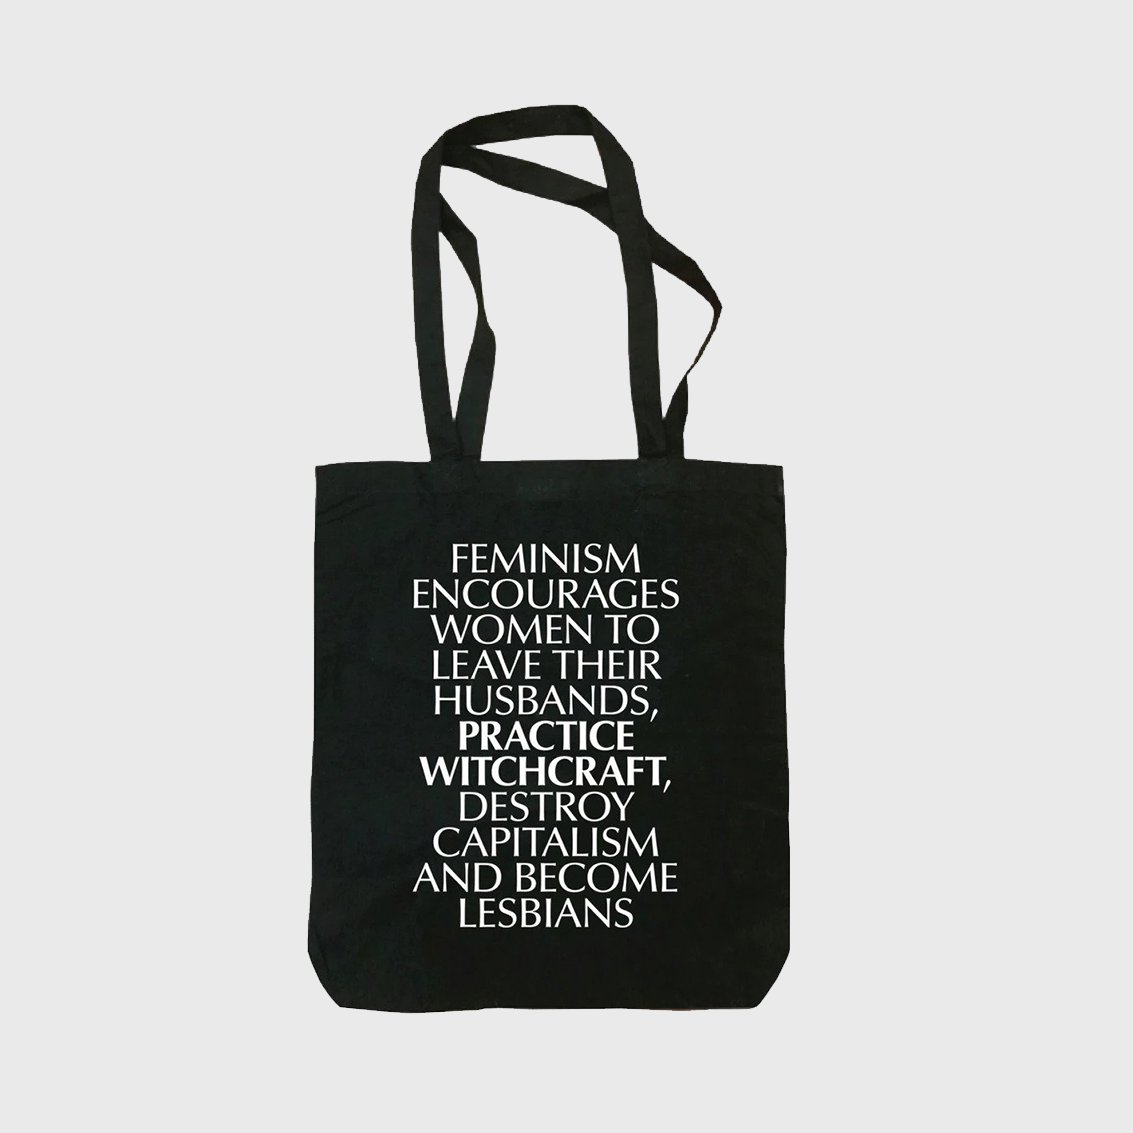 This spring equinox, get 25% off Ignota's classic titles and all merch, including gifts, totes and longsleeves. Including the Air Age Longsleeve and and our iconic tote bags ⁠ Link in bio for all sale!⁠